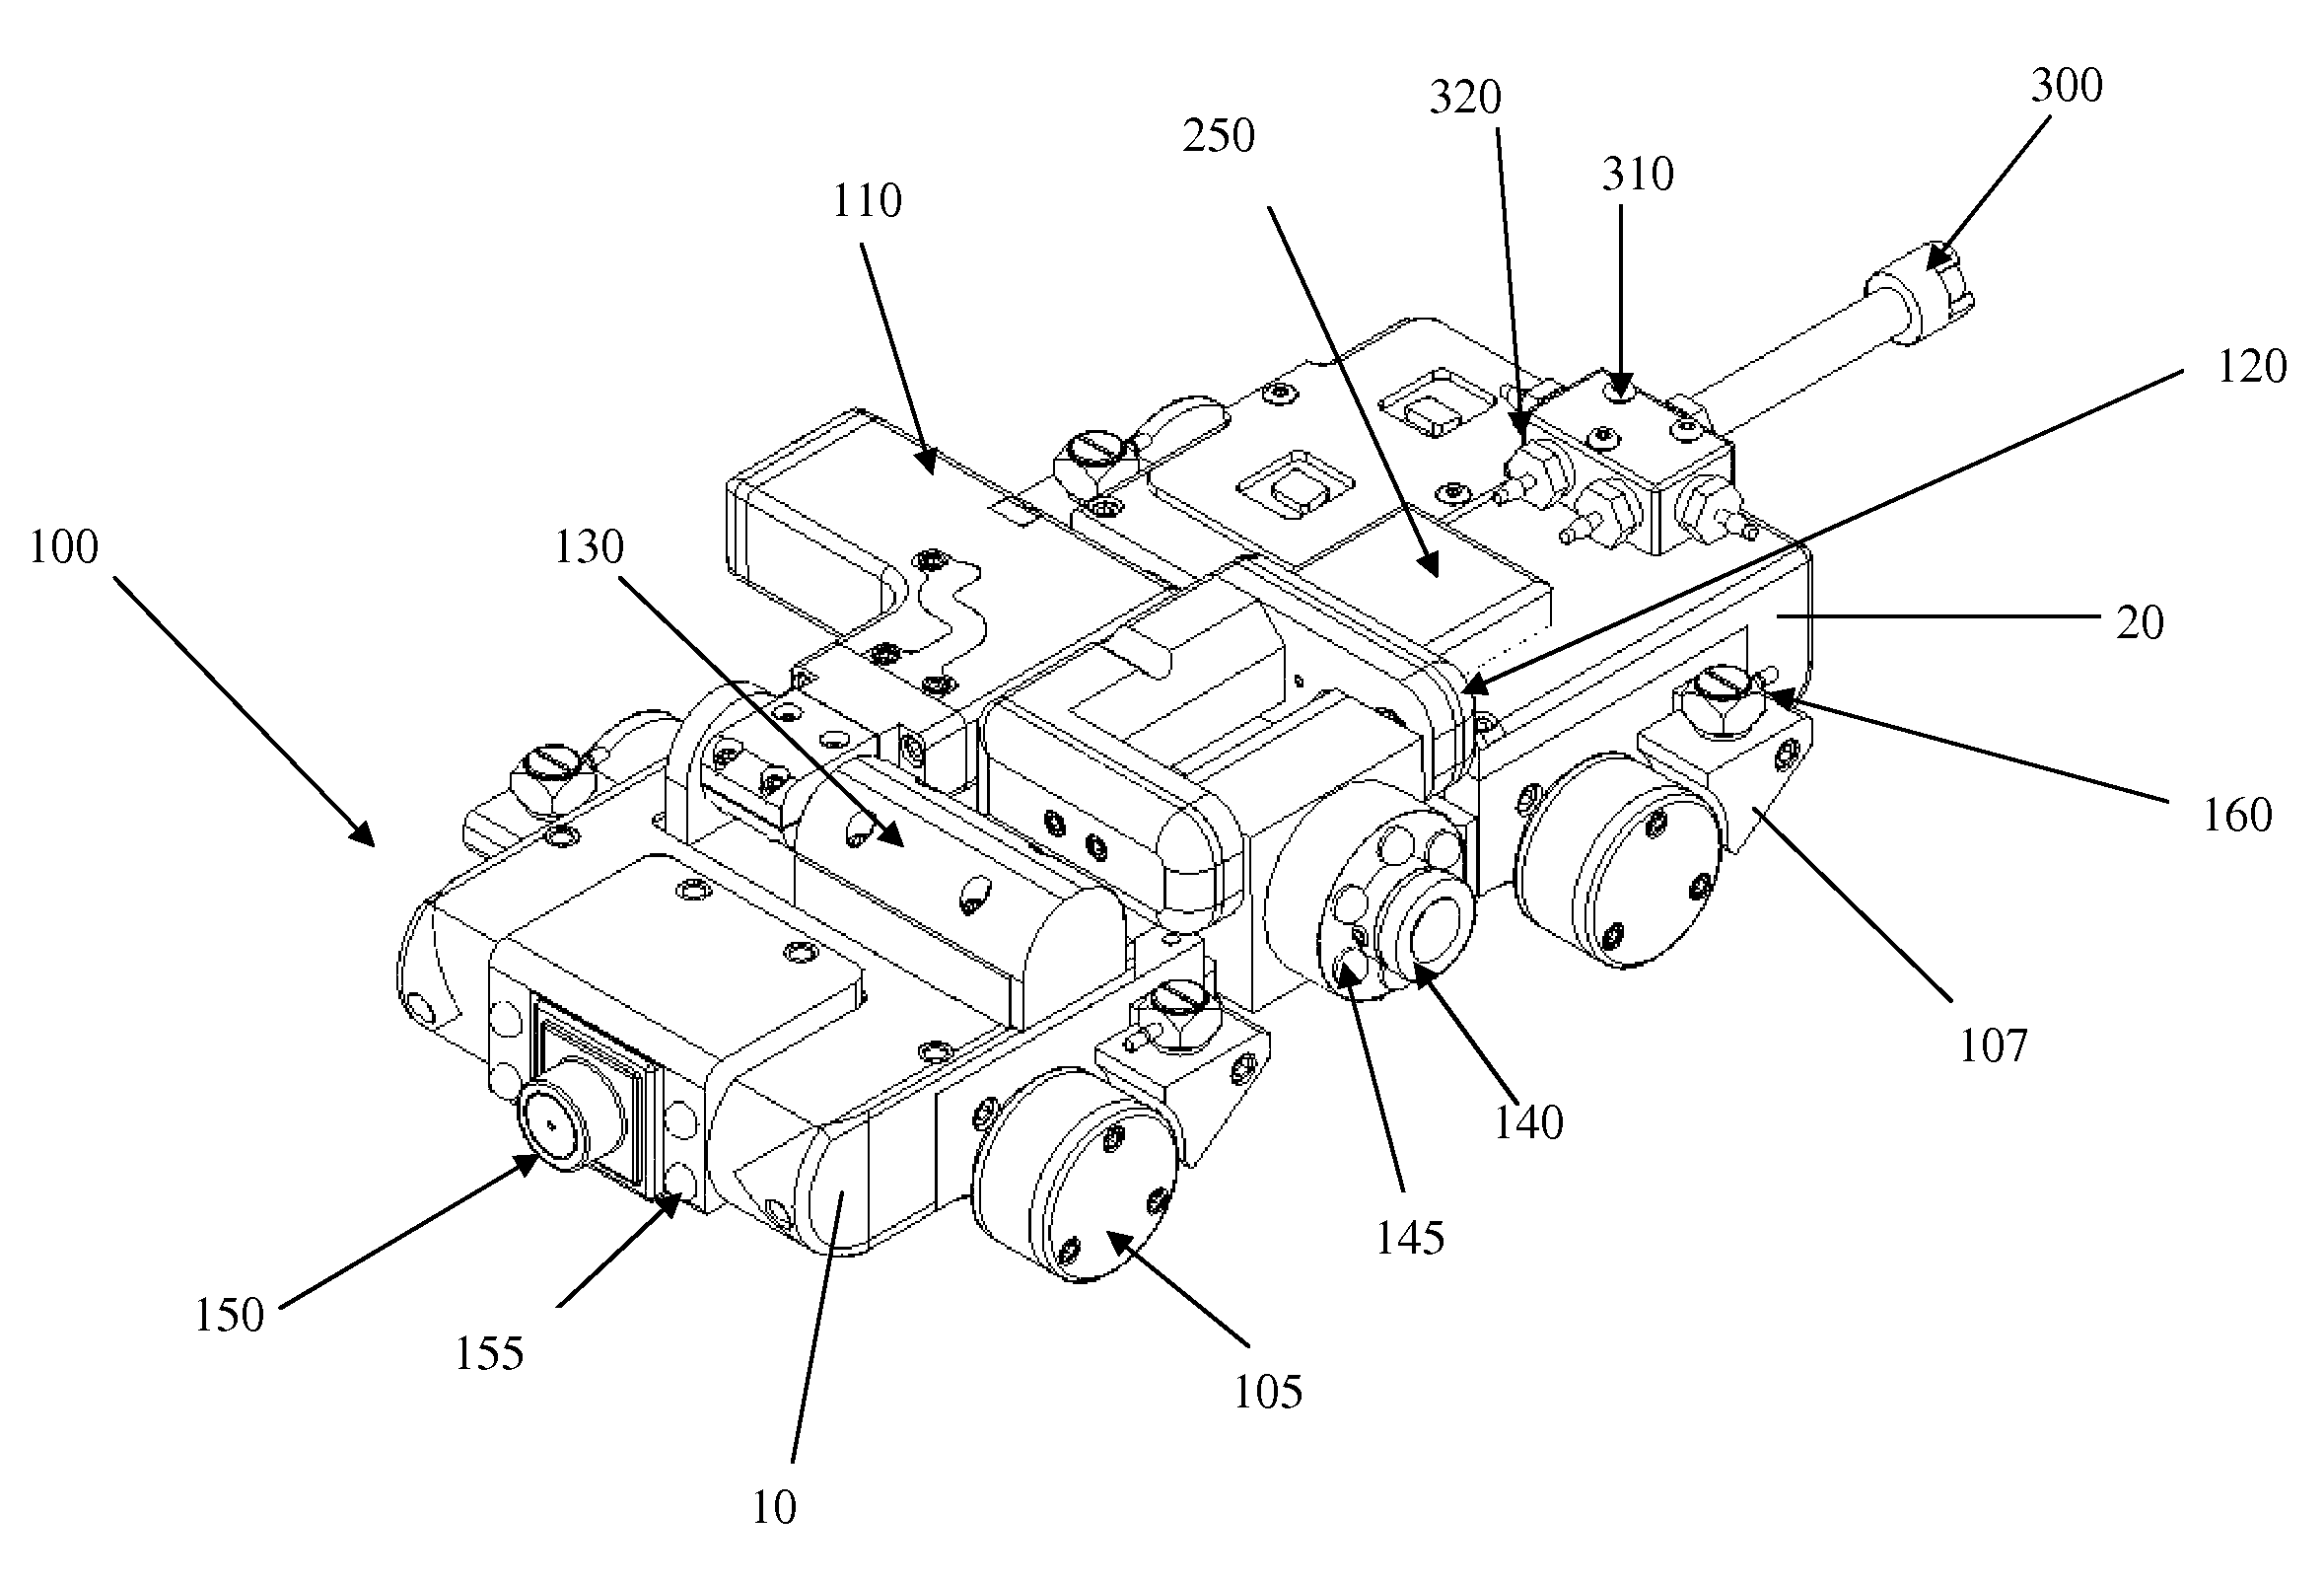 Inspection system and inspection process utilizing magnetic inspection vehicle